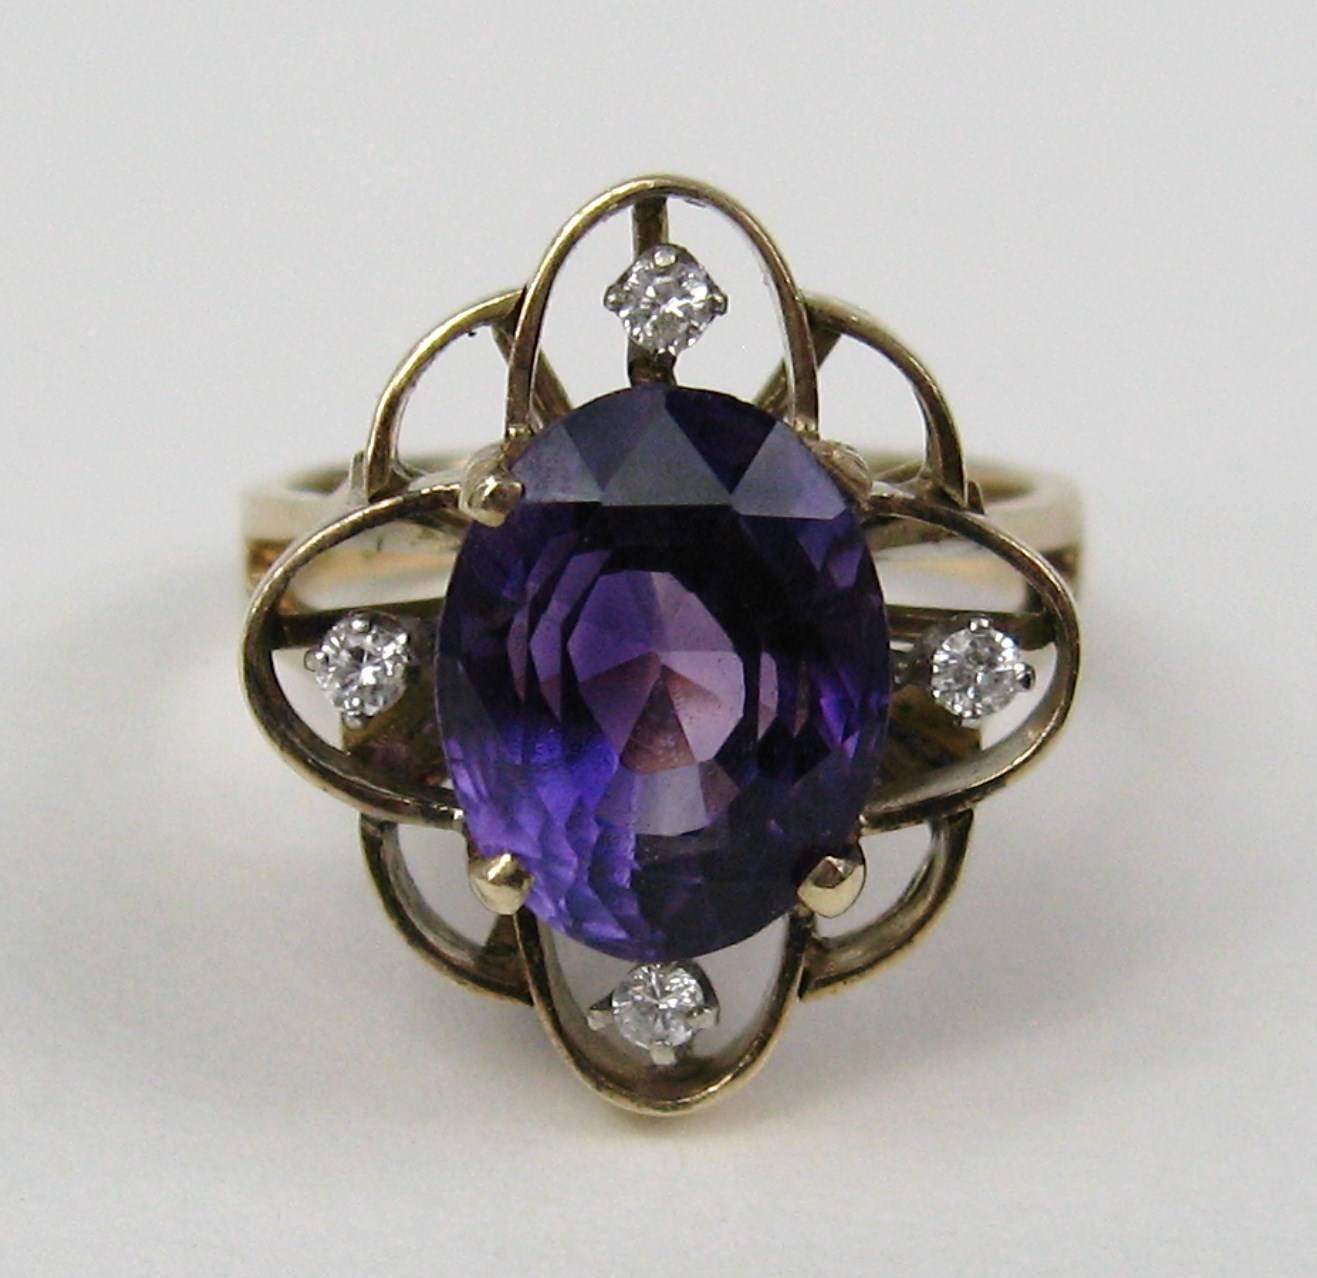 Amethyst and diamonds set in 14K yellow gold, the Amethyst is 4.4 Carats. Size 7+ Can be sized by your jeweler or us.  This is out of our massive collection of Hopi, Zuni, Navajo, Southwestern, sterling silver, costume jewelry and fine jewelry. Be